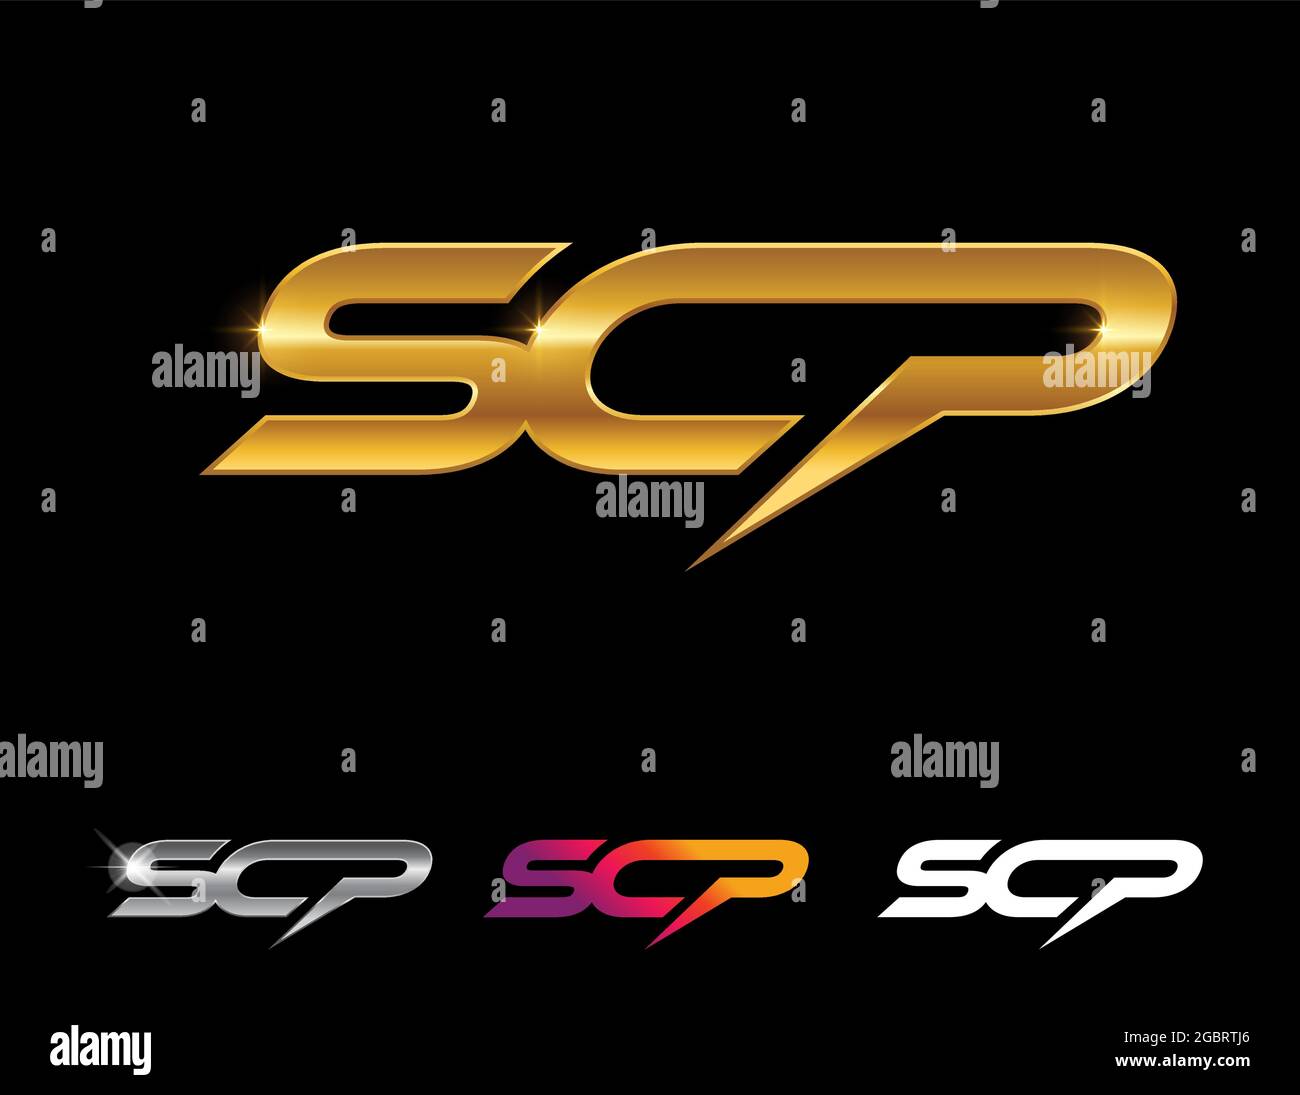 Scp logo Stock Vector Images - Alamy